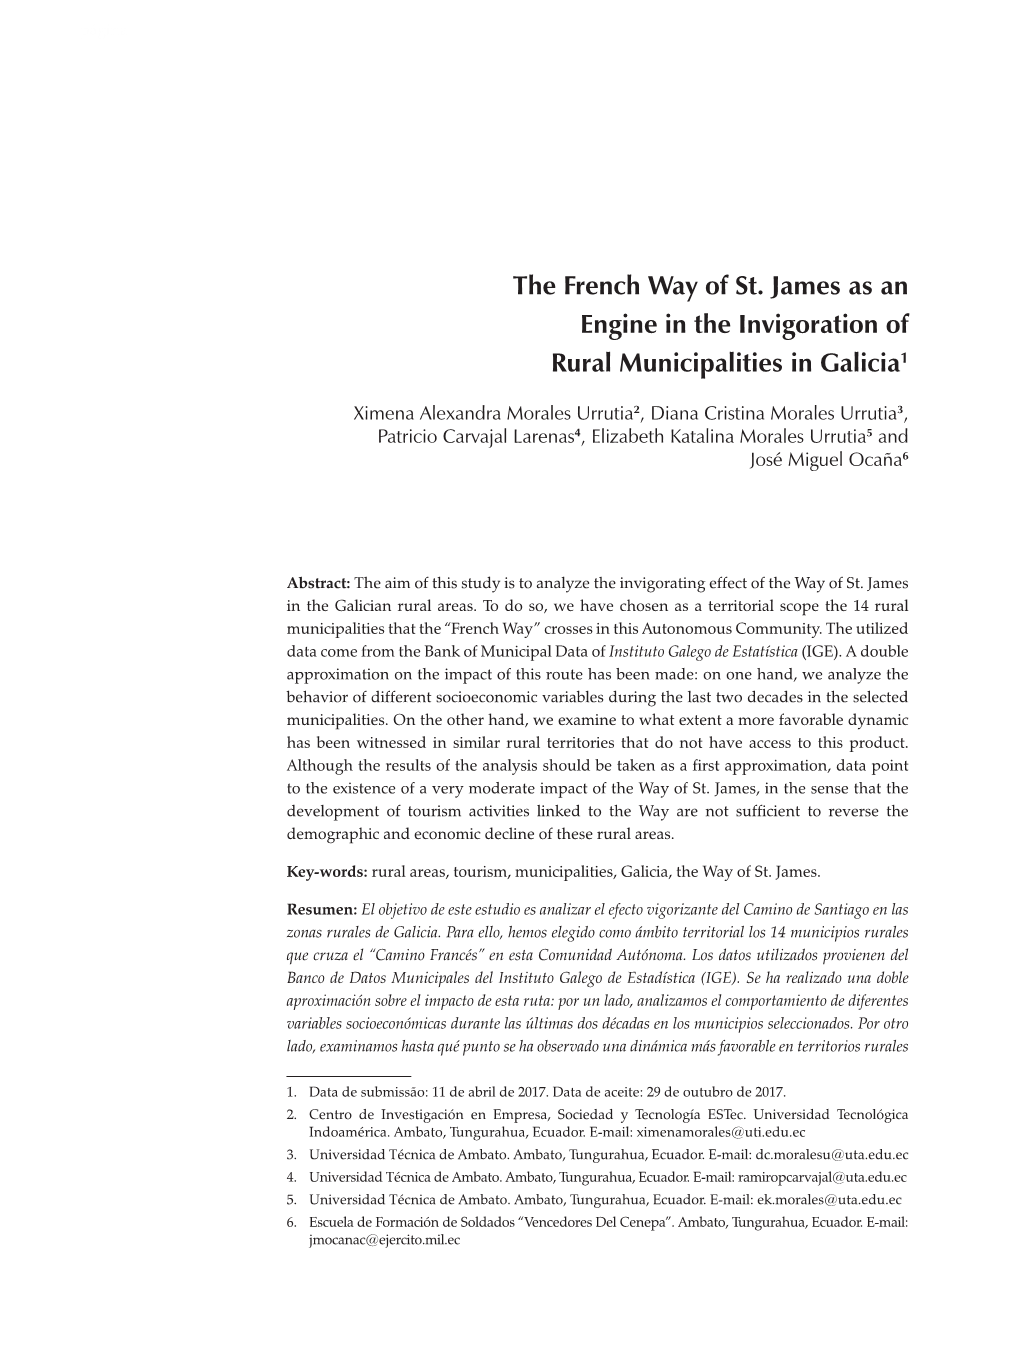 The French Way of St. James As an Engine in the Invigoration of Rural Municipalities in Galicia1